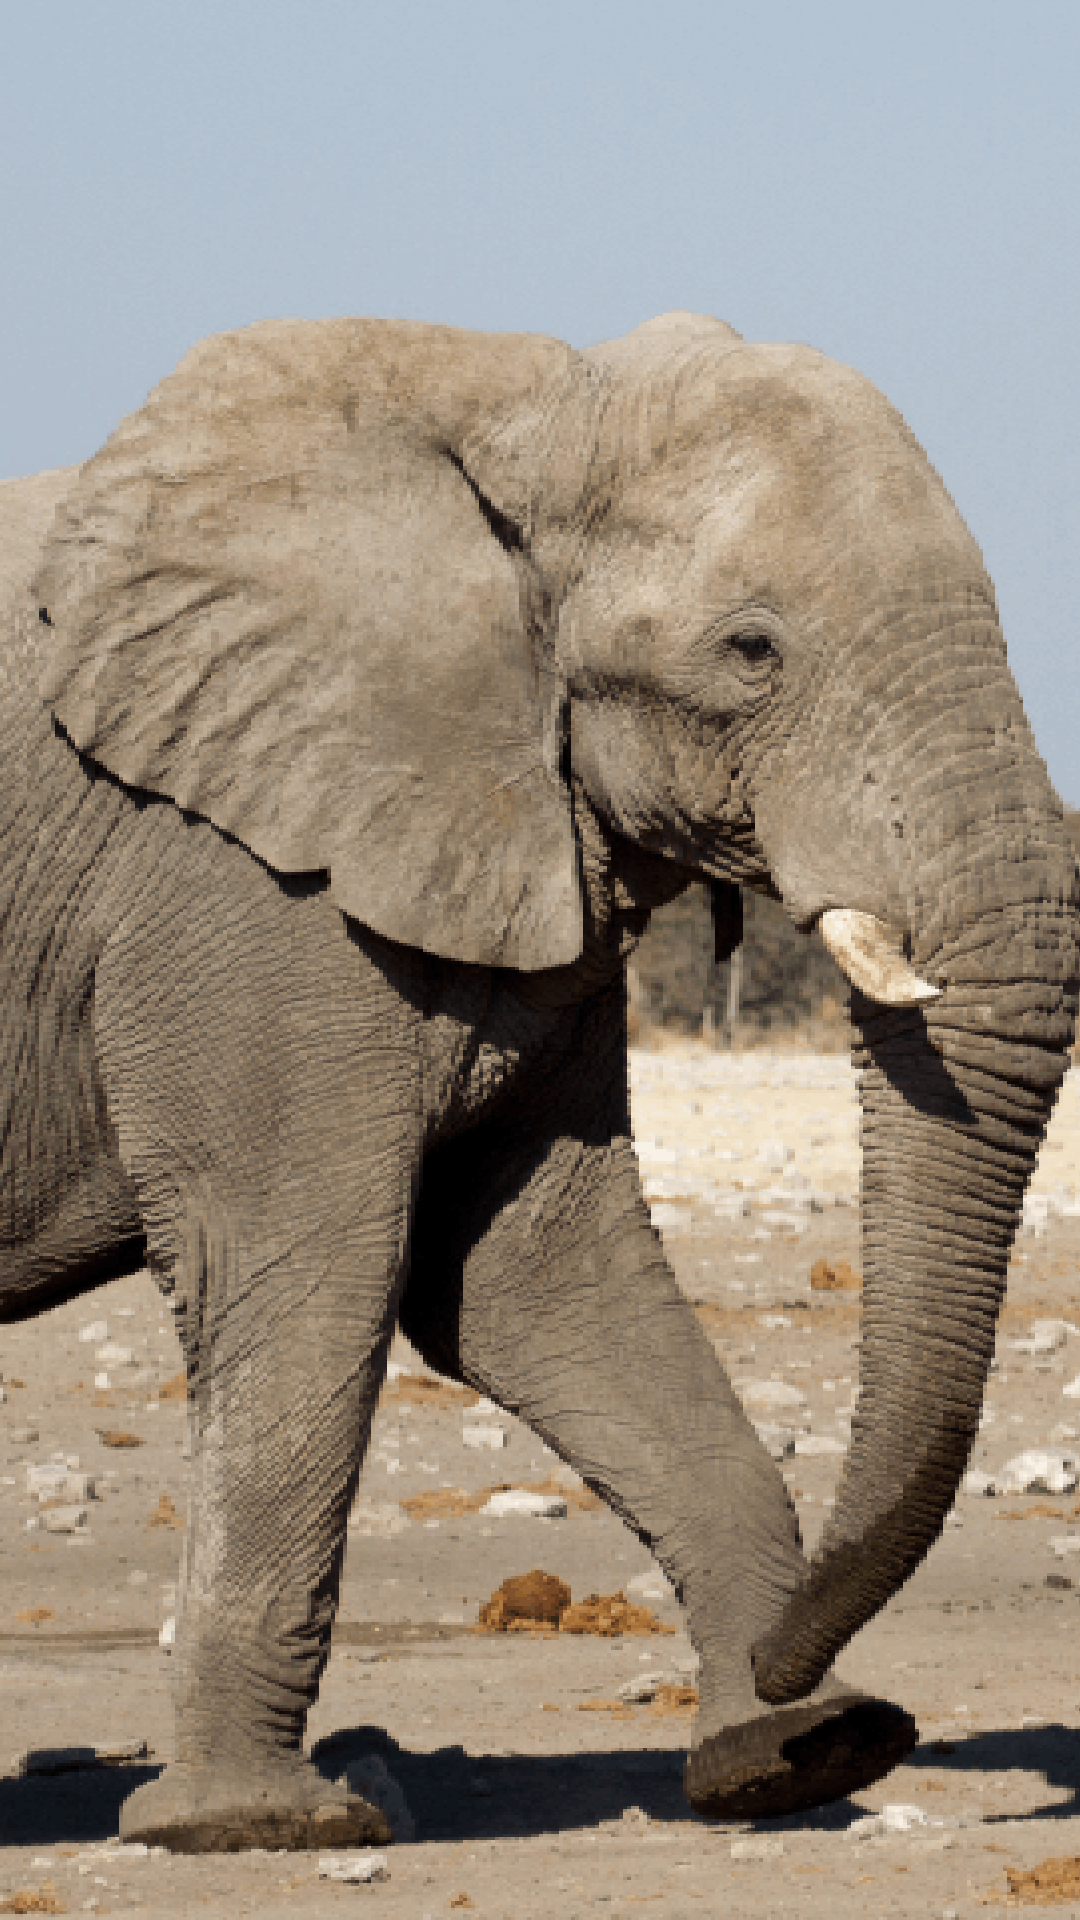 Why do elephants have tusks, big ears and long trunks?